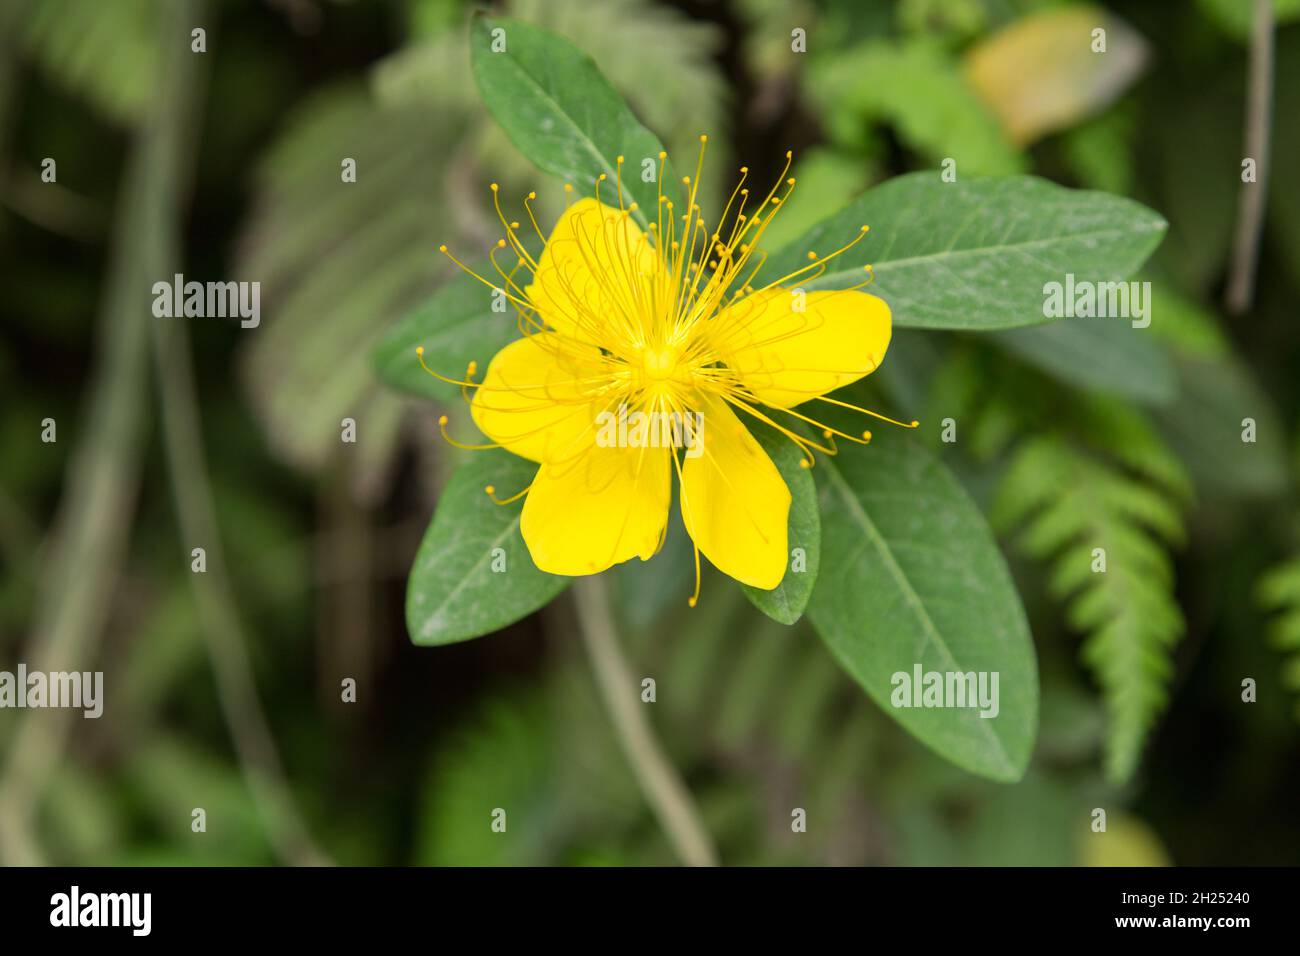 A St. John's Wort, Genus Hypericum, in flower by the waterfall in Furong, China. Stock Photo